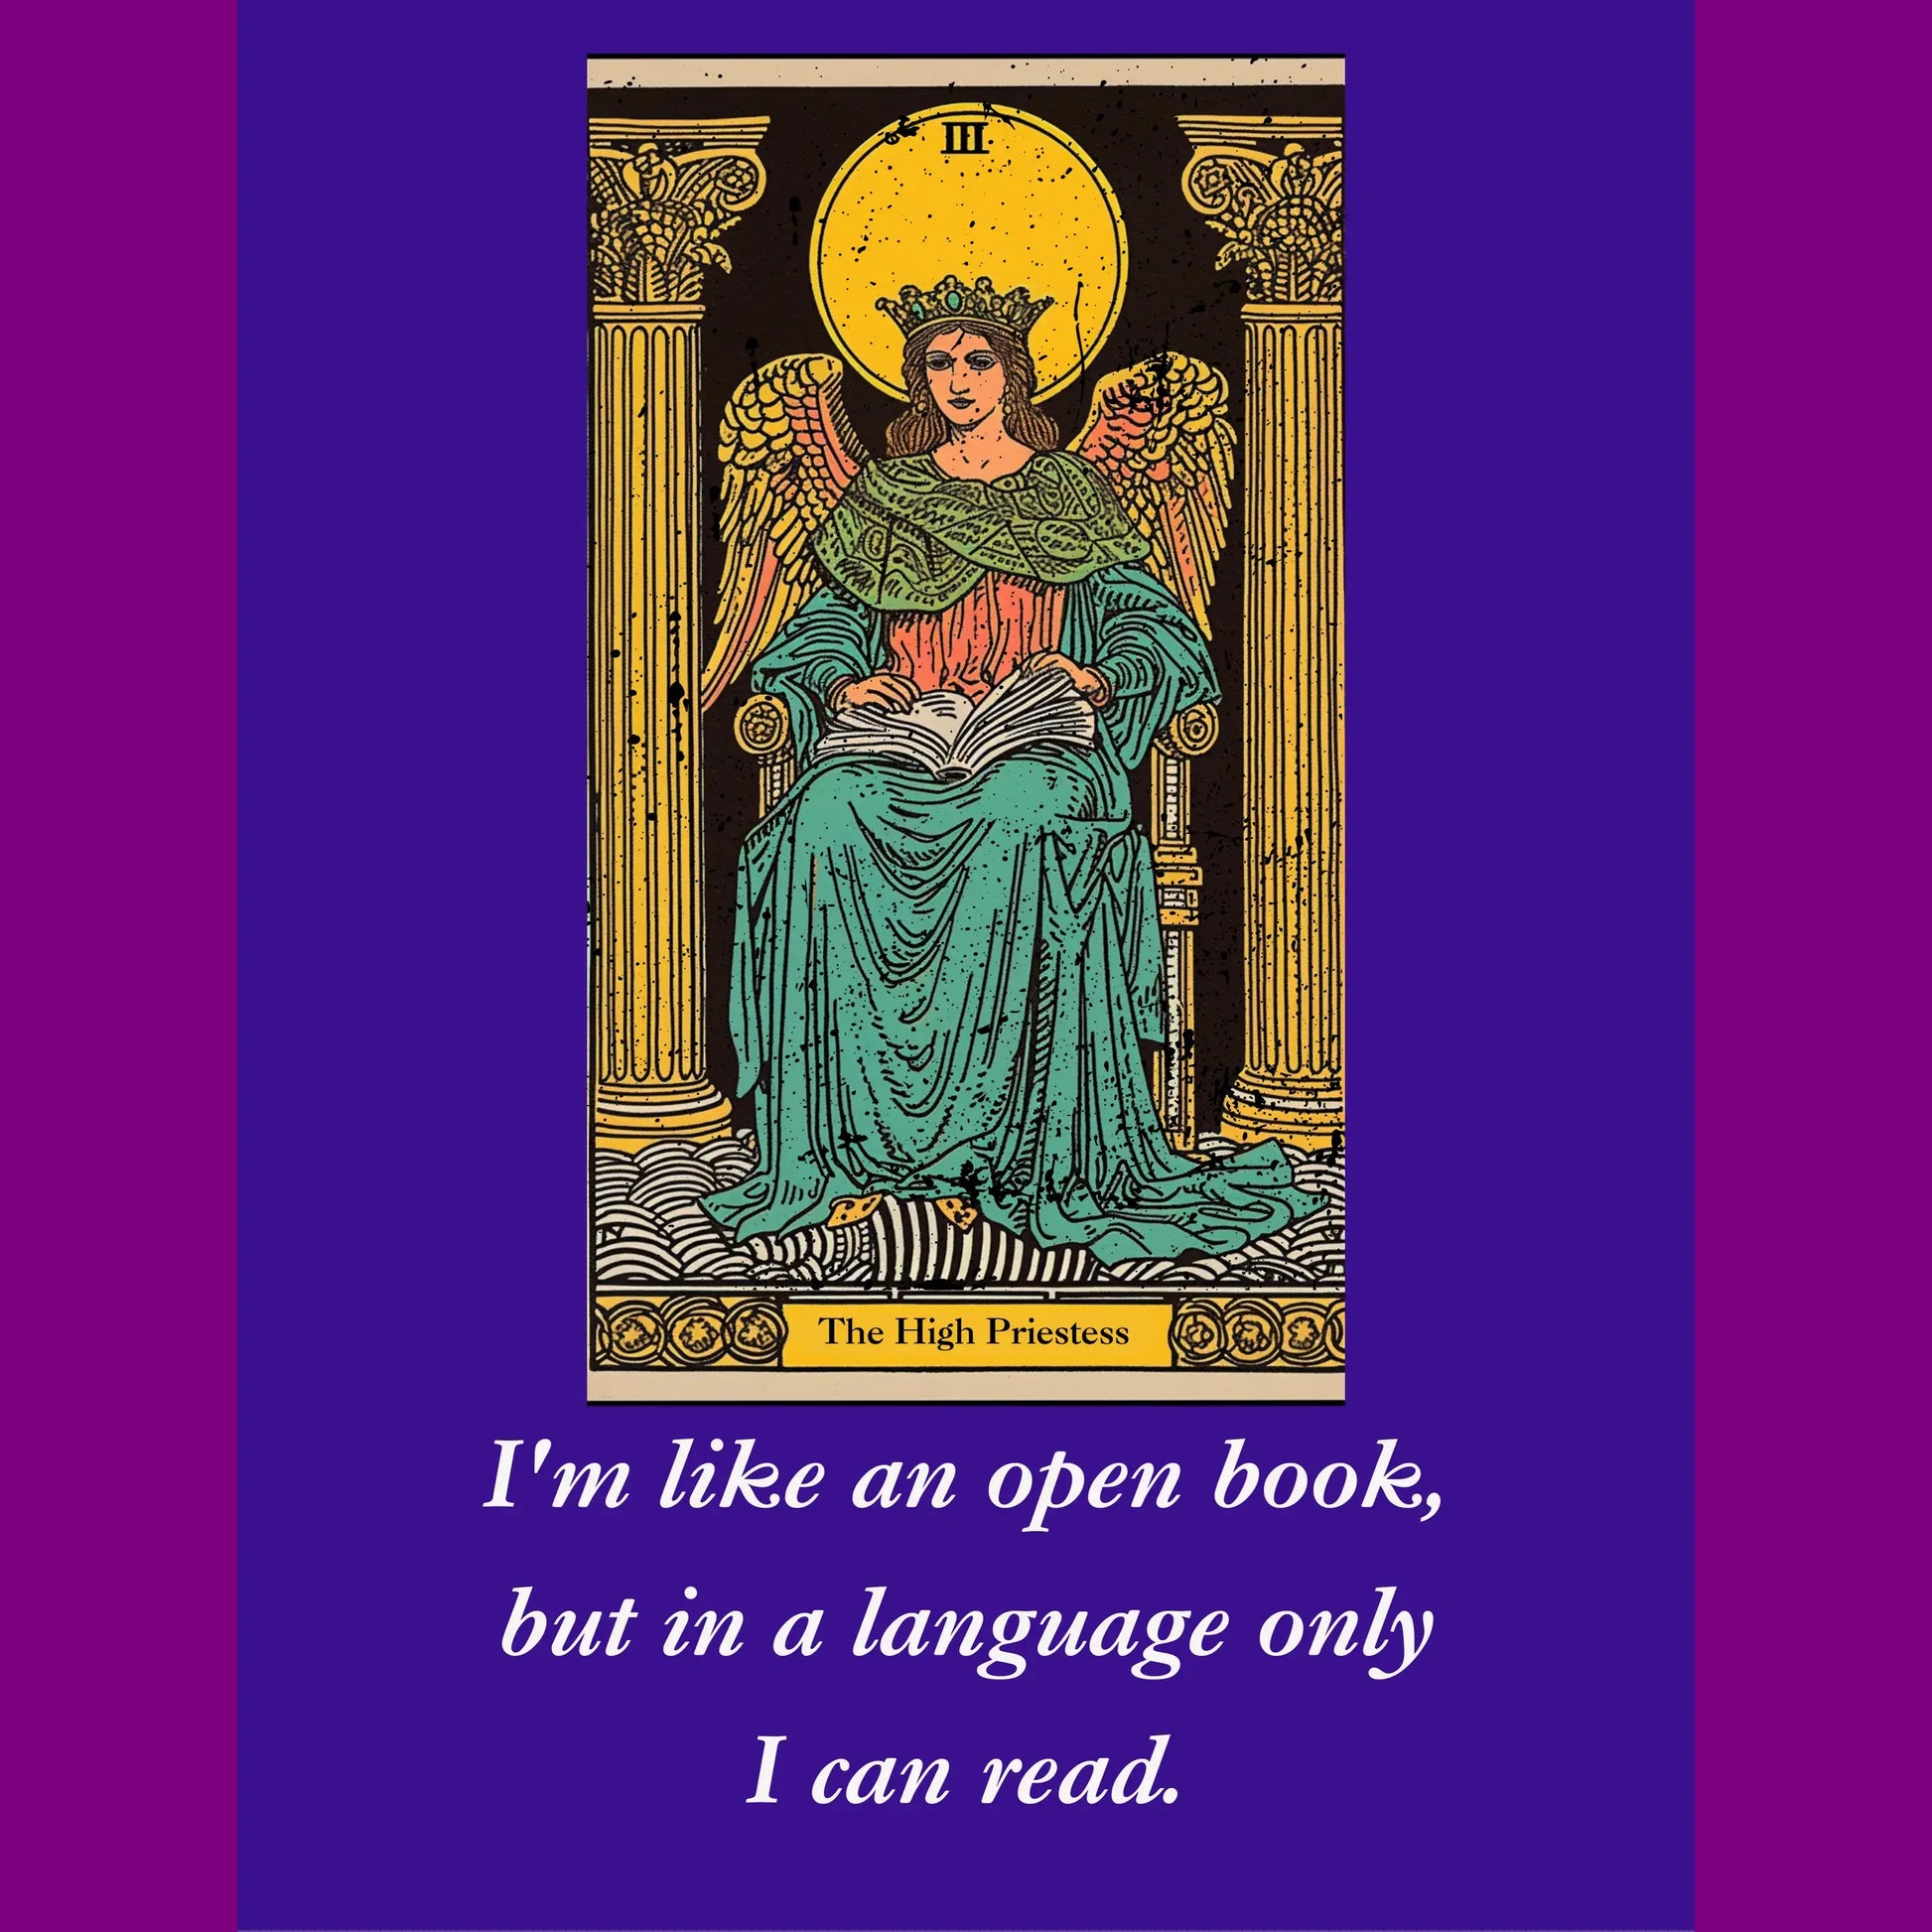 I'm like an open book, but in a language only I can read. Witty, high priestess tarot card design from Blk Moon shop.